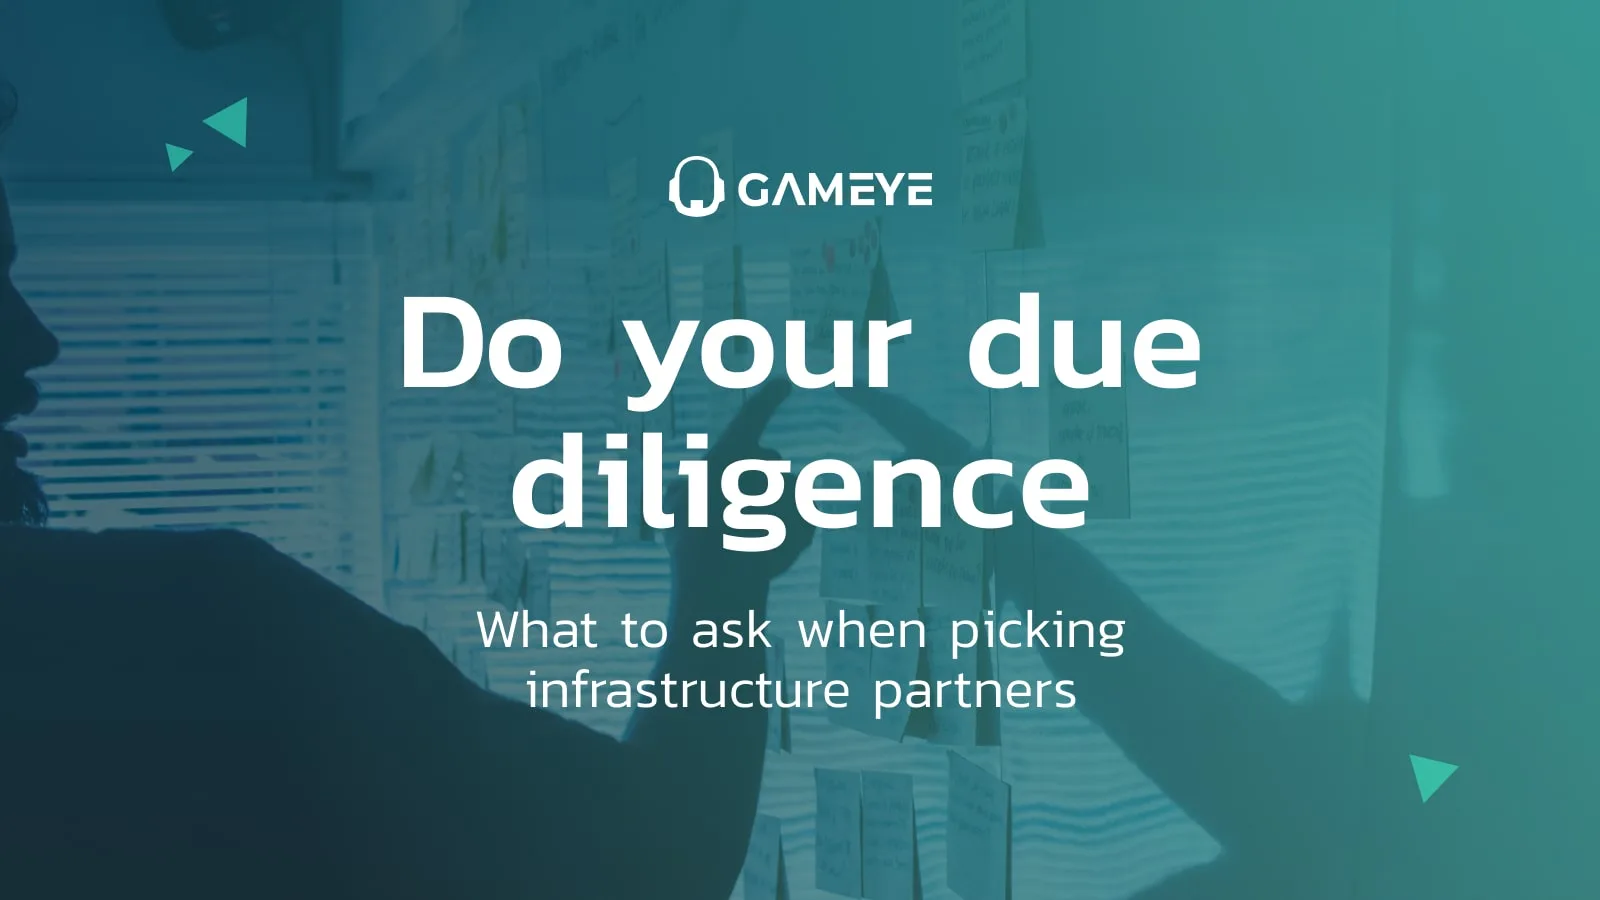 Do your due diligence: what to ask when picking infrastructure partners